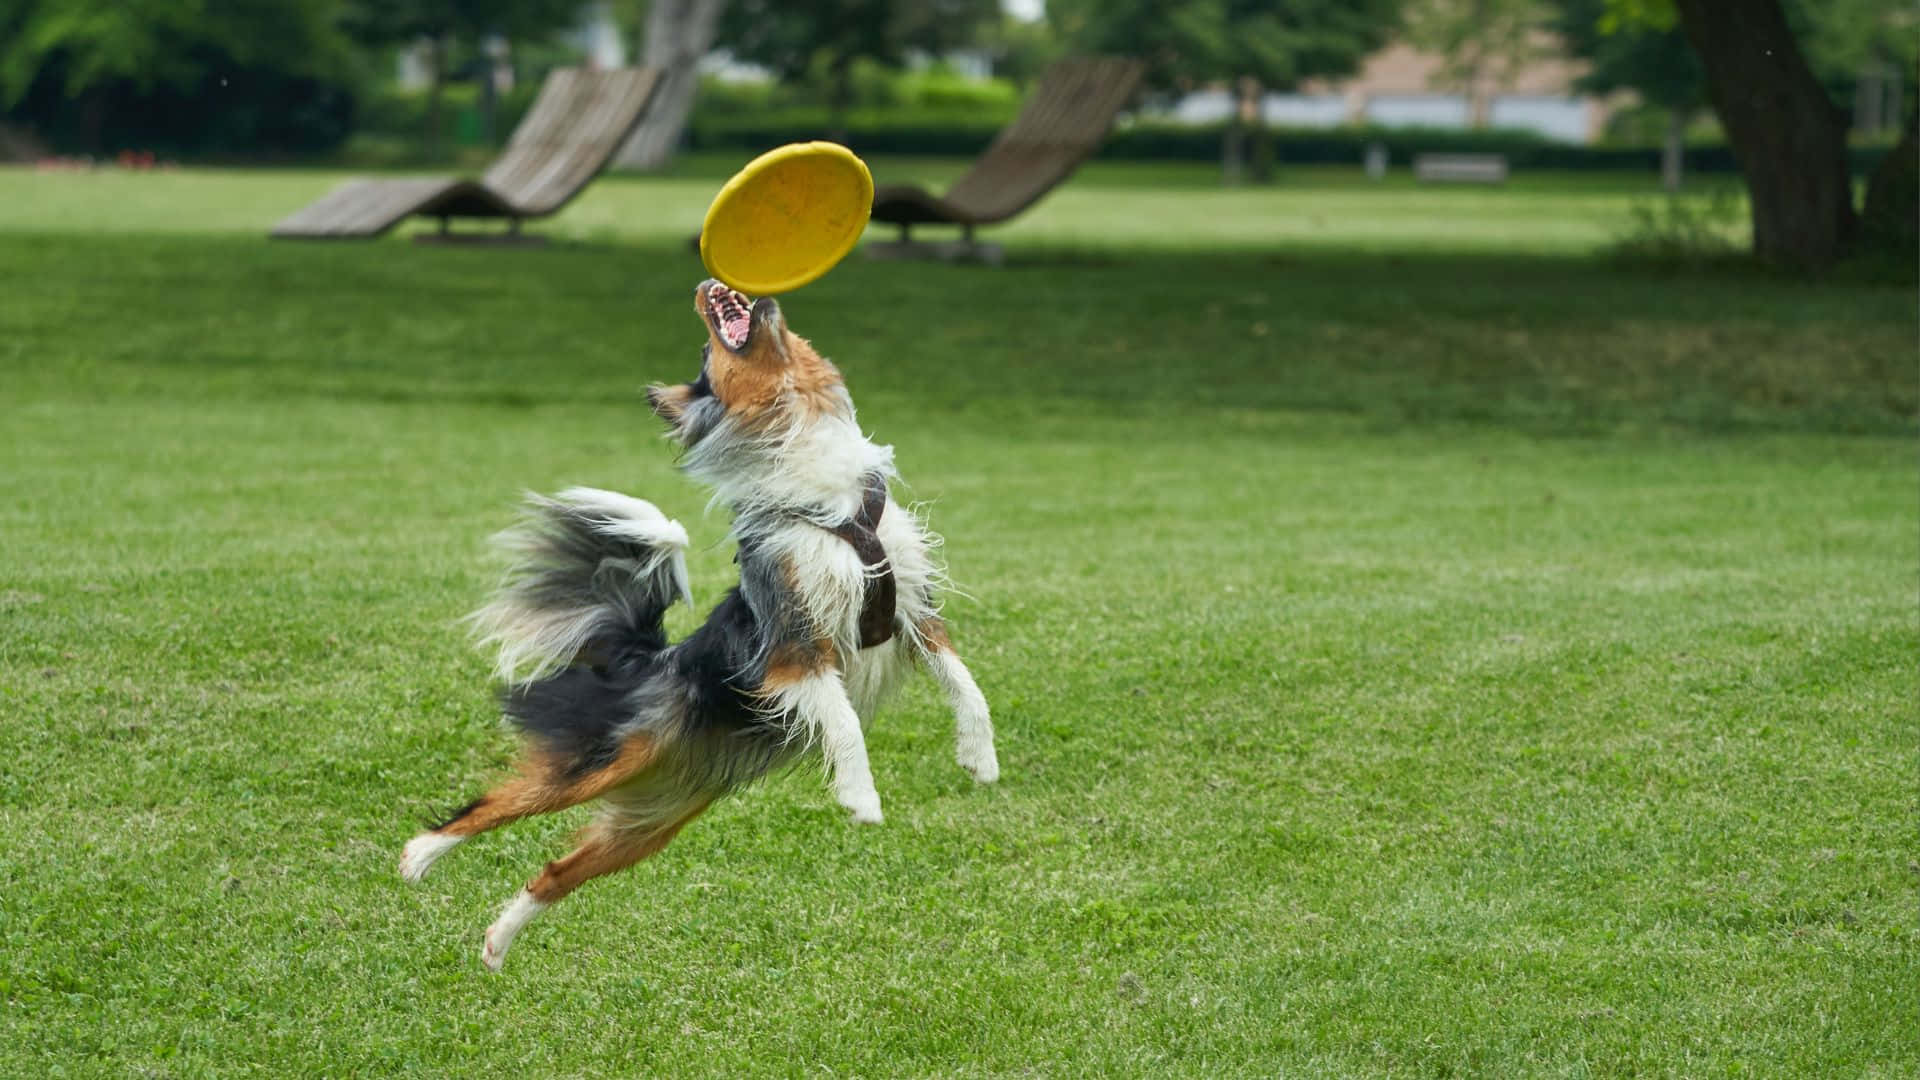 Lots of fun outdoors with Hd Frisbee